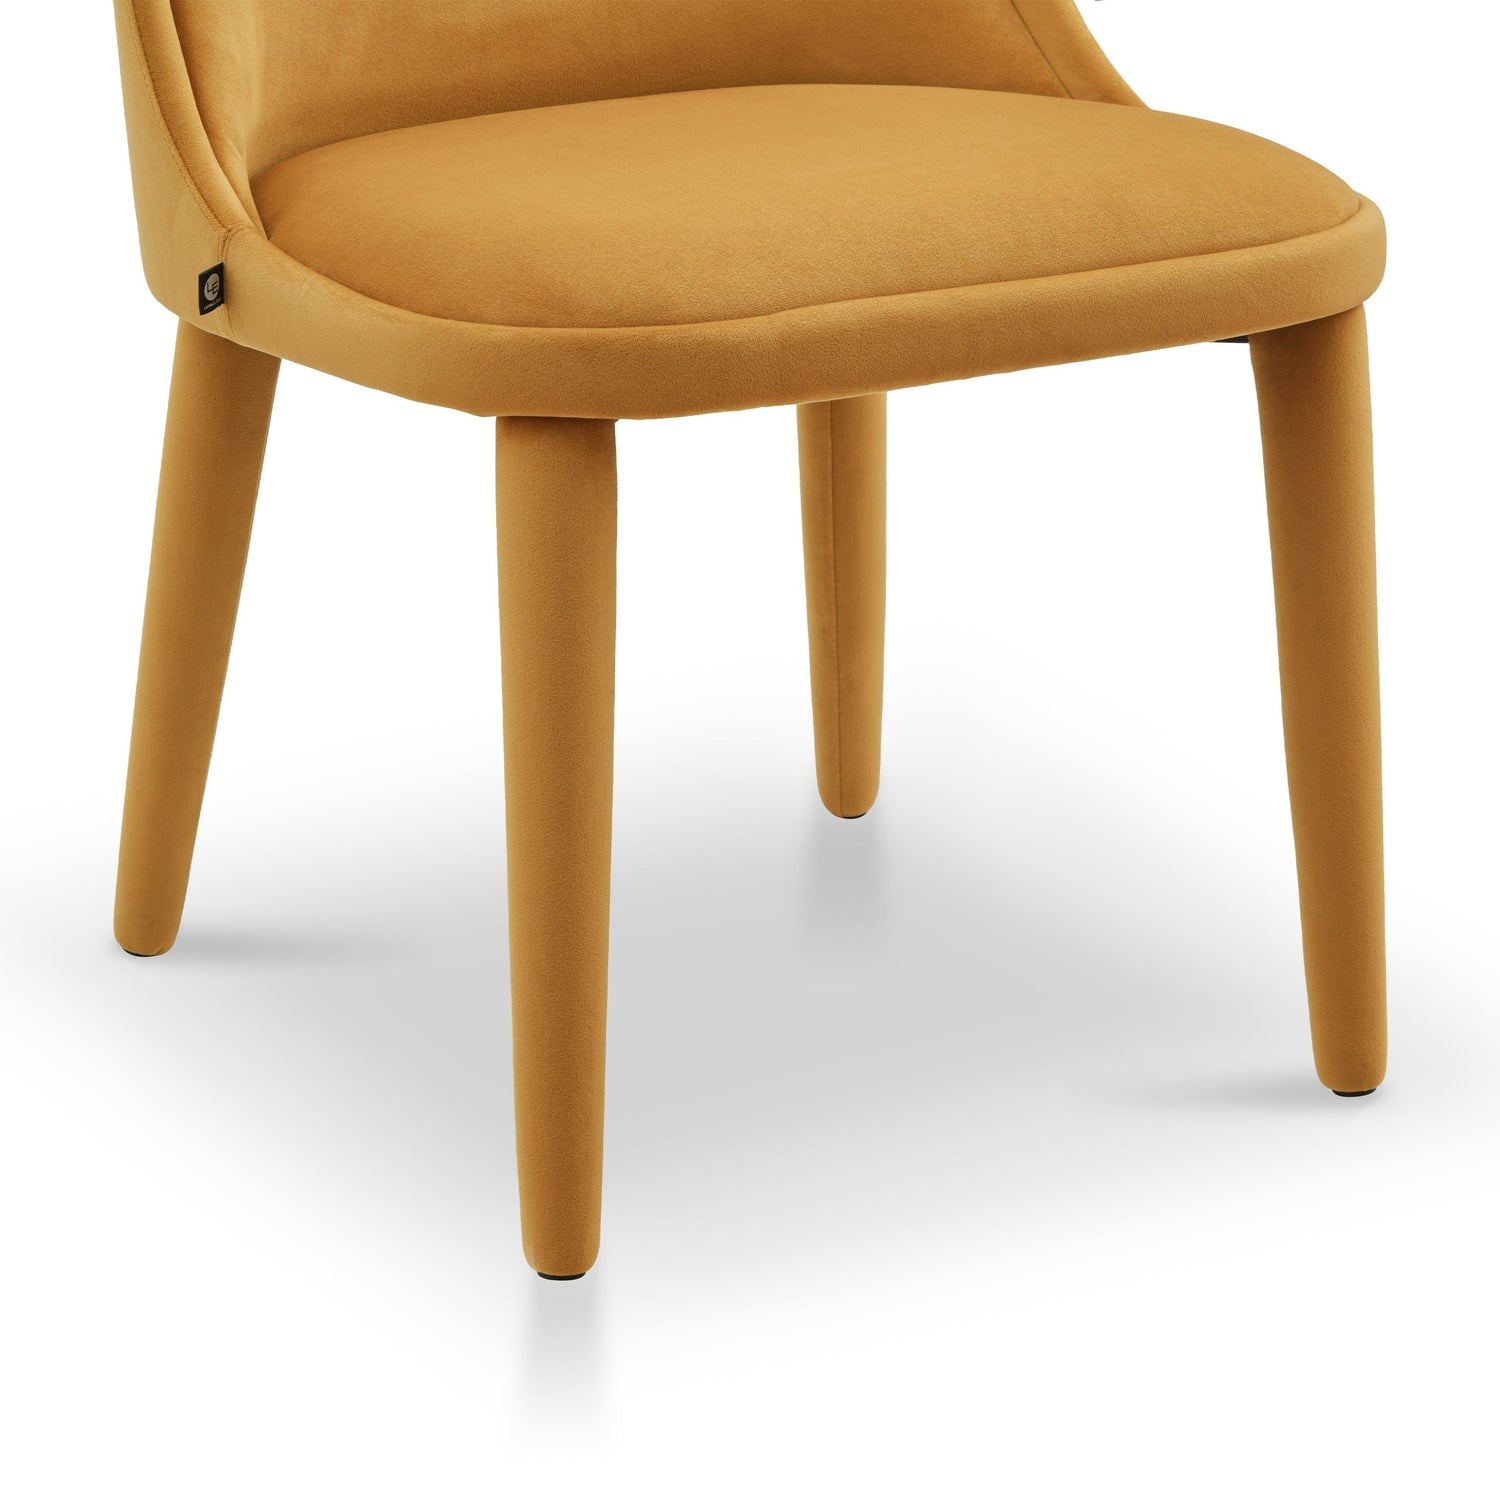  LiangAndEimil-Liang & Eimil Diva Dining Chair in Kaster II Mustard-Yellow 965 